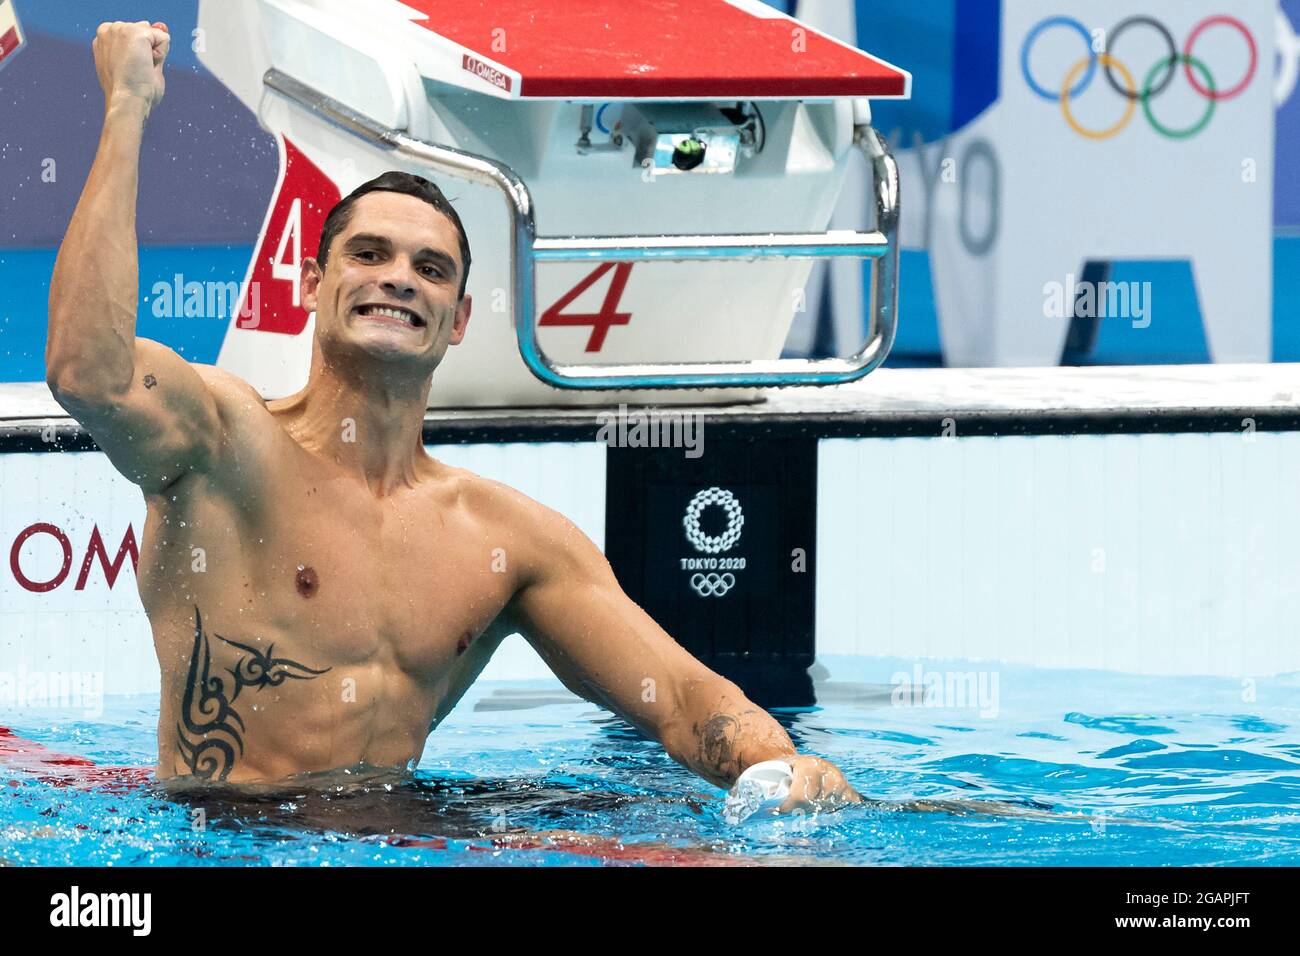 Florent Manaudou High Resolution Stock Photography And Images Alamy